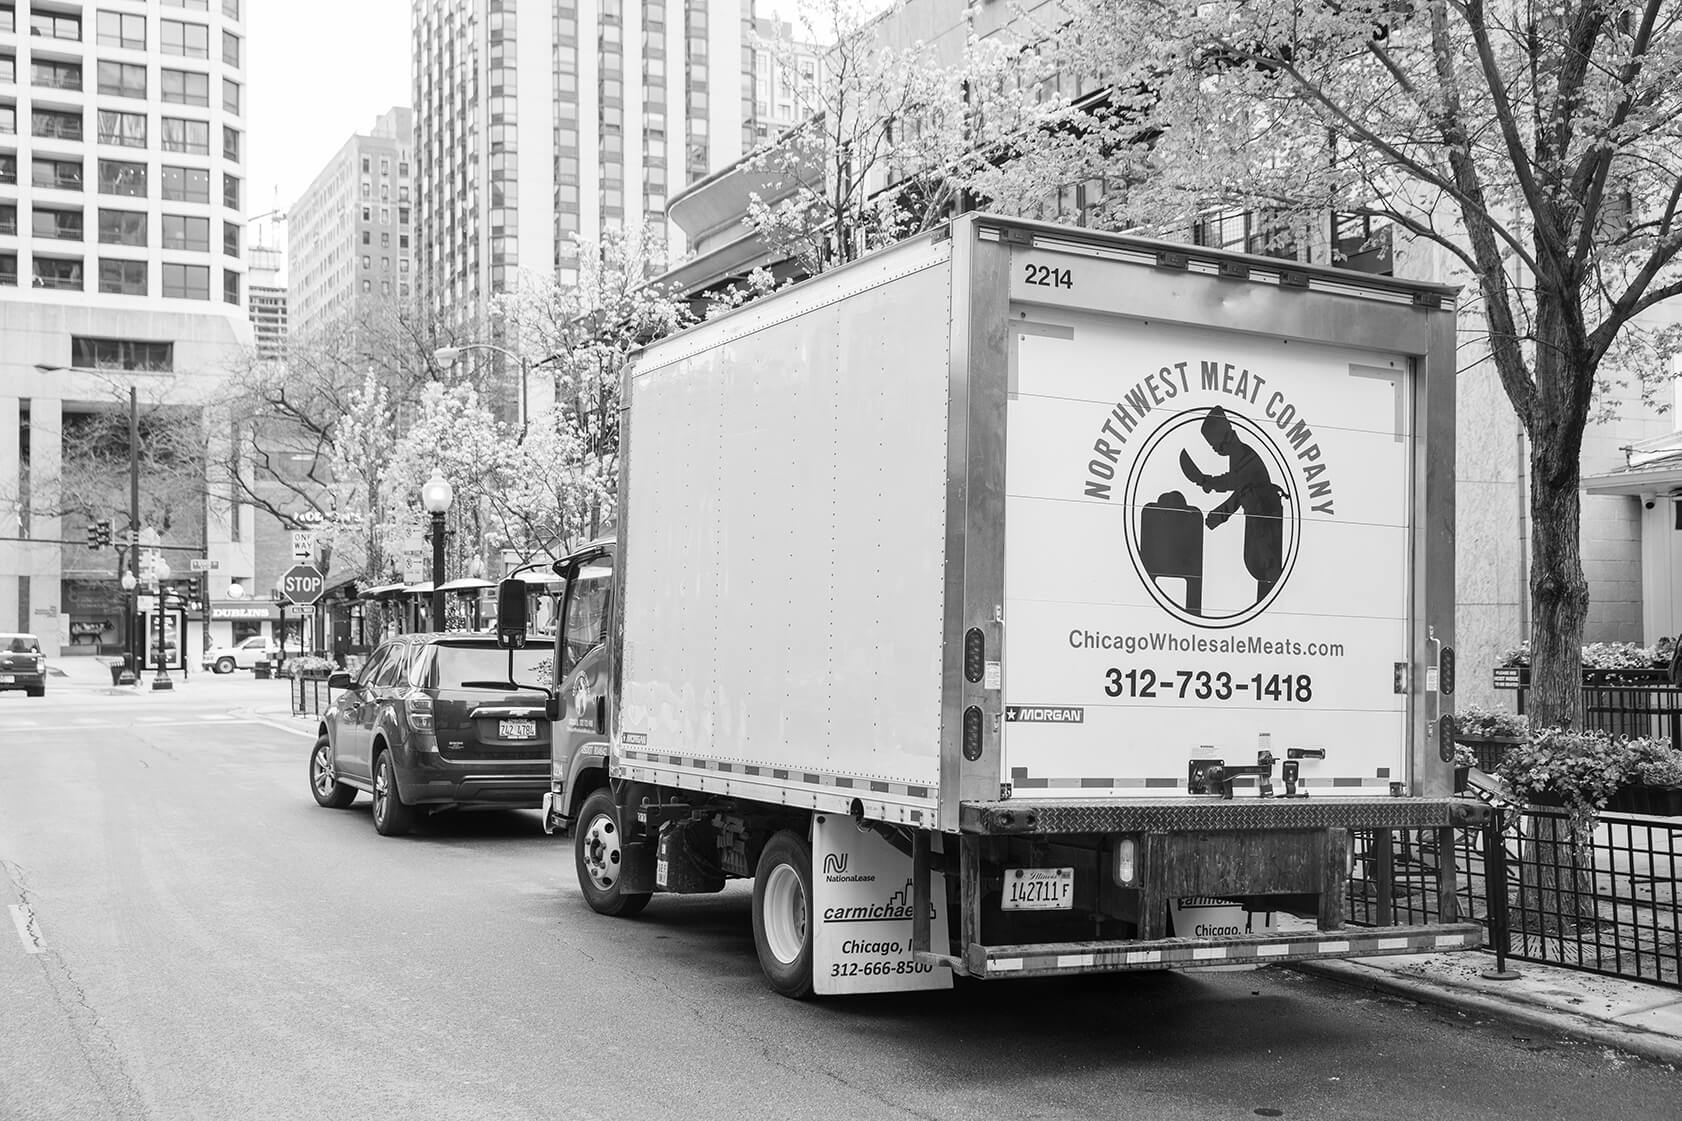 NWMC Delivery Truck